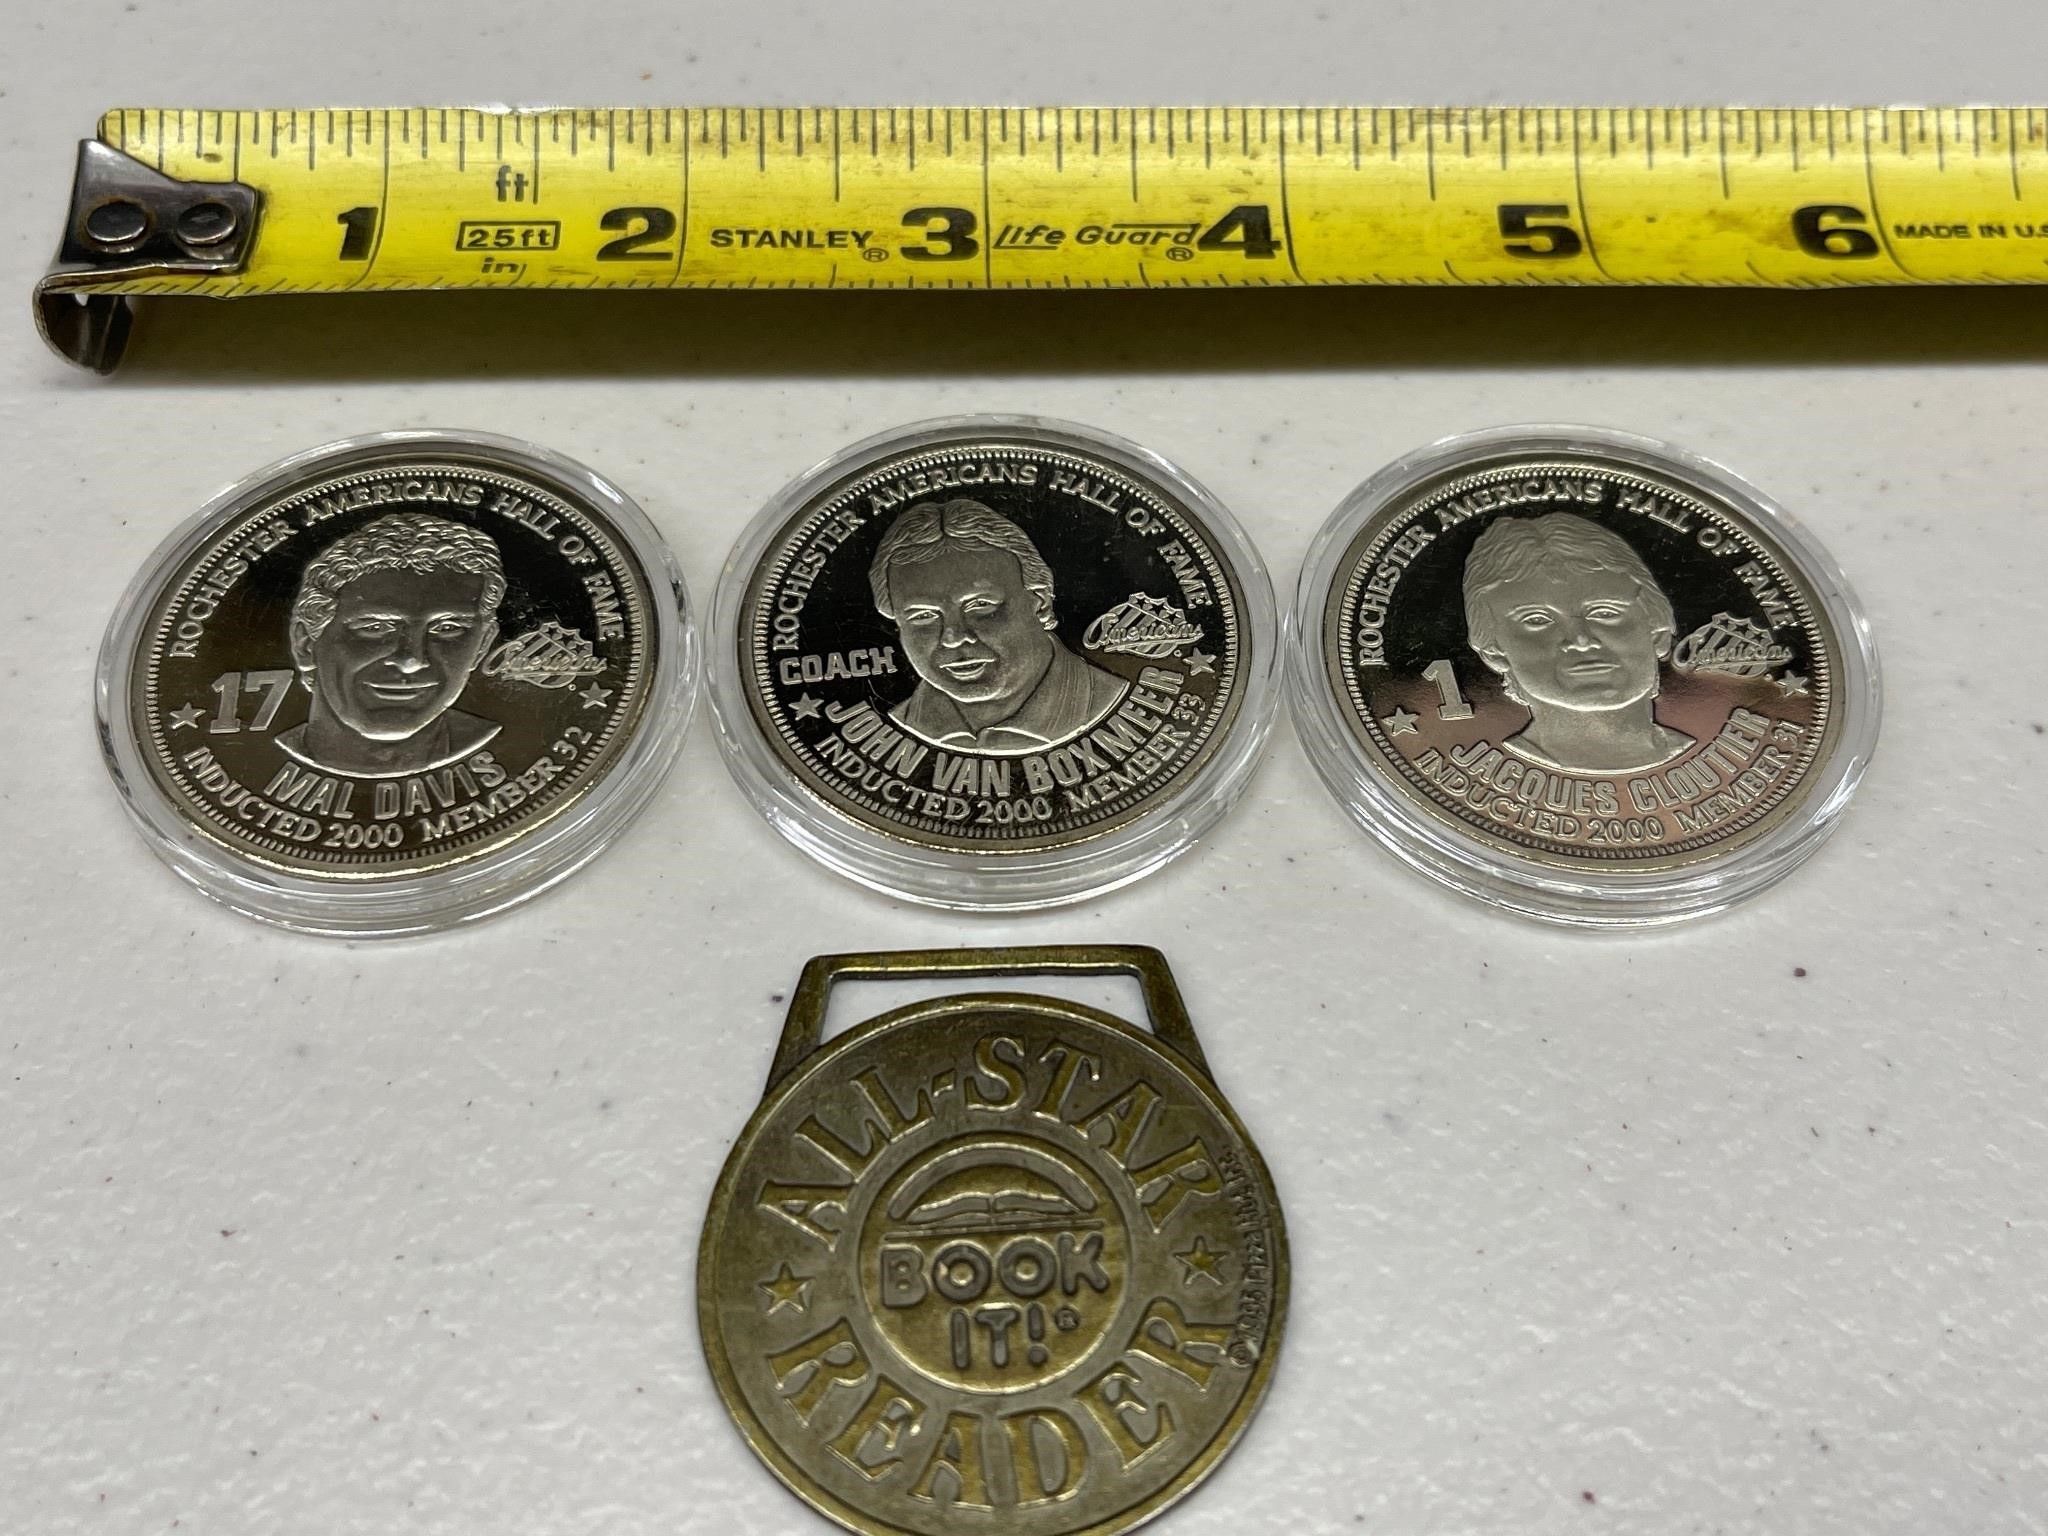 3 XEROX CO ROCHESTER AMERICAN HALL OF FAME COINS